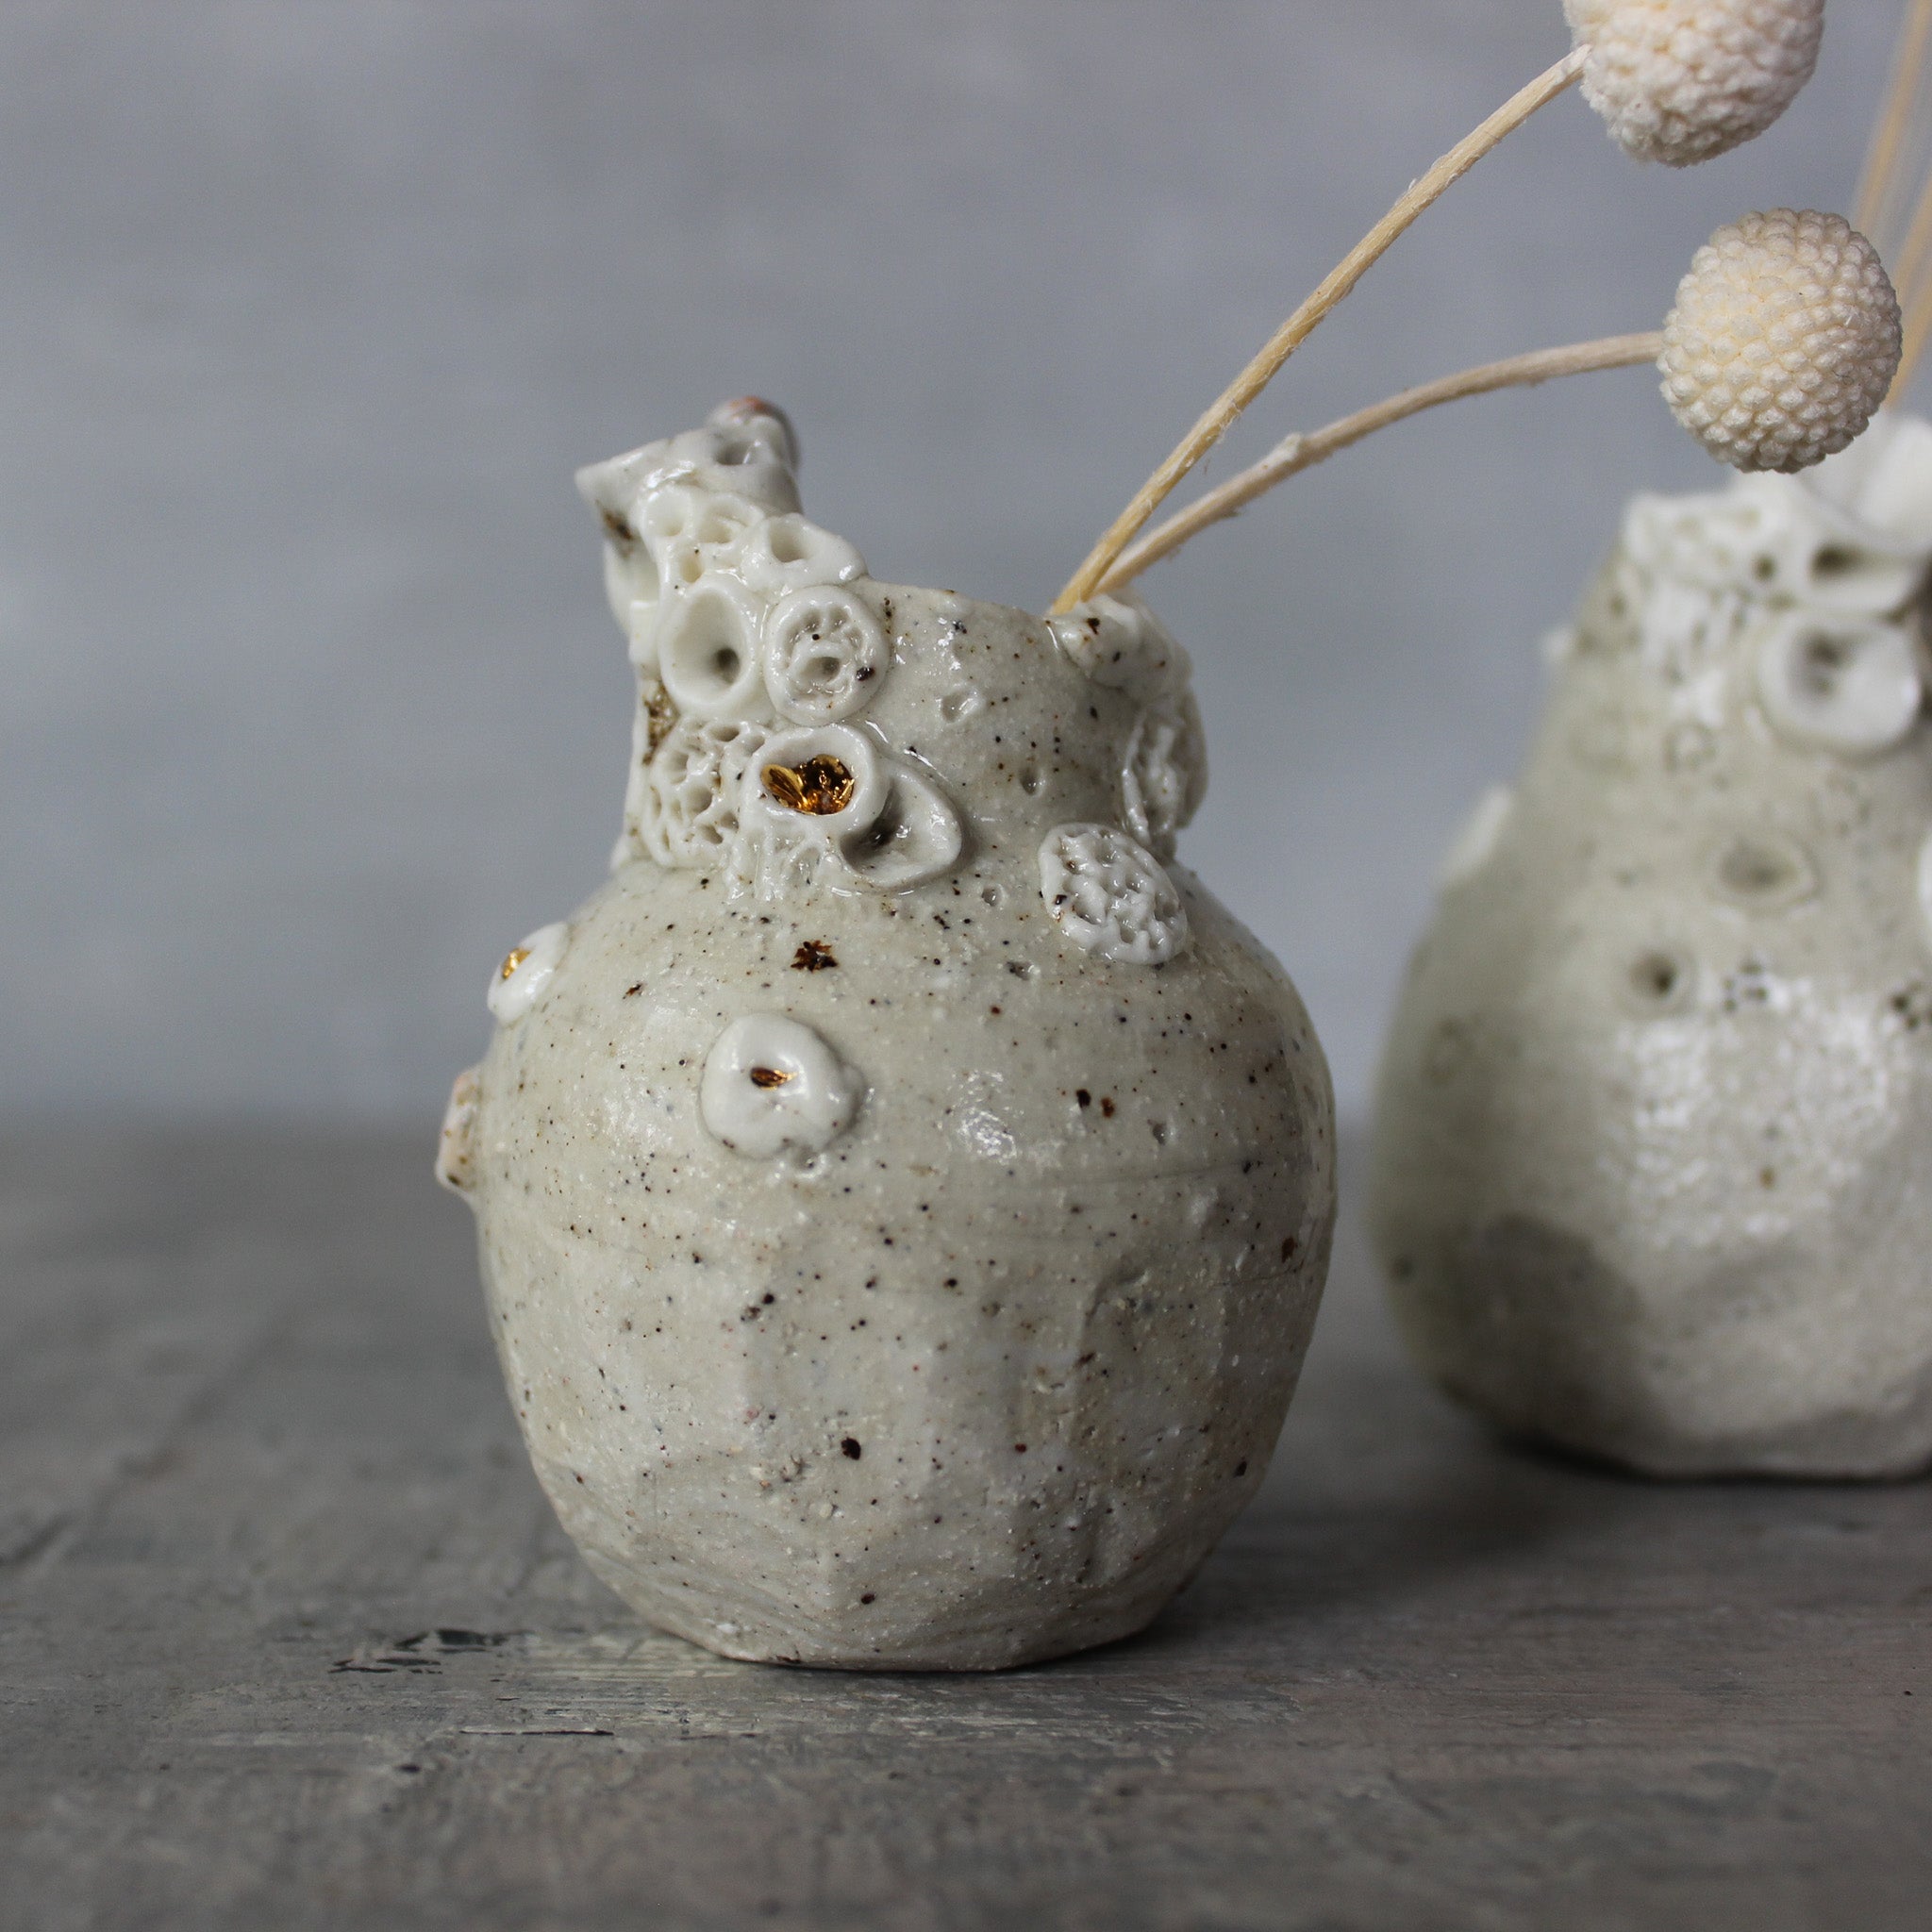 Little Rock Coral Vases - Tribe Castlemaine